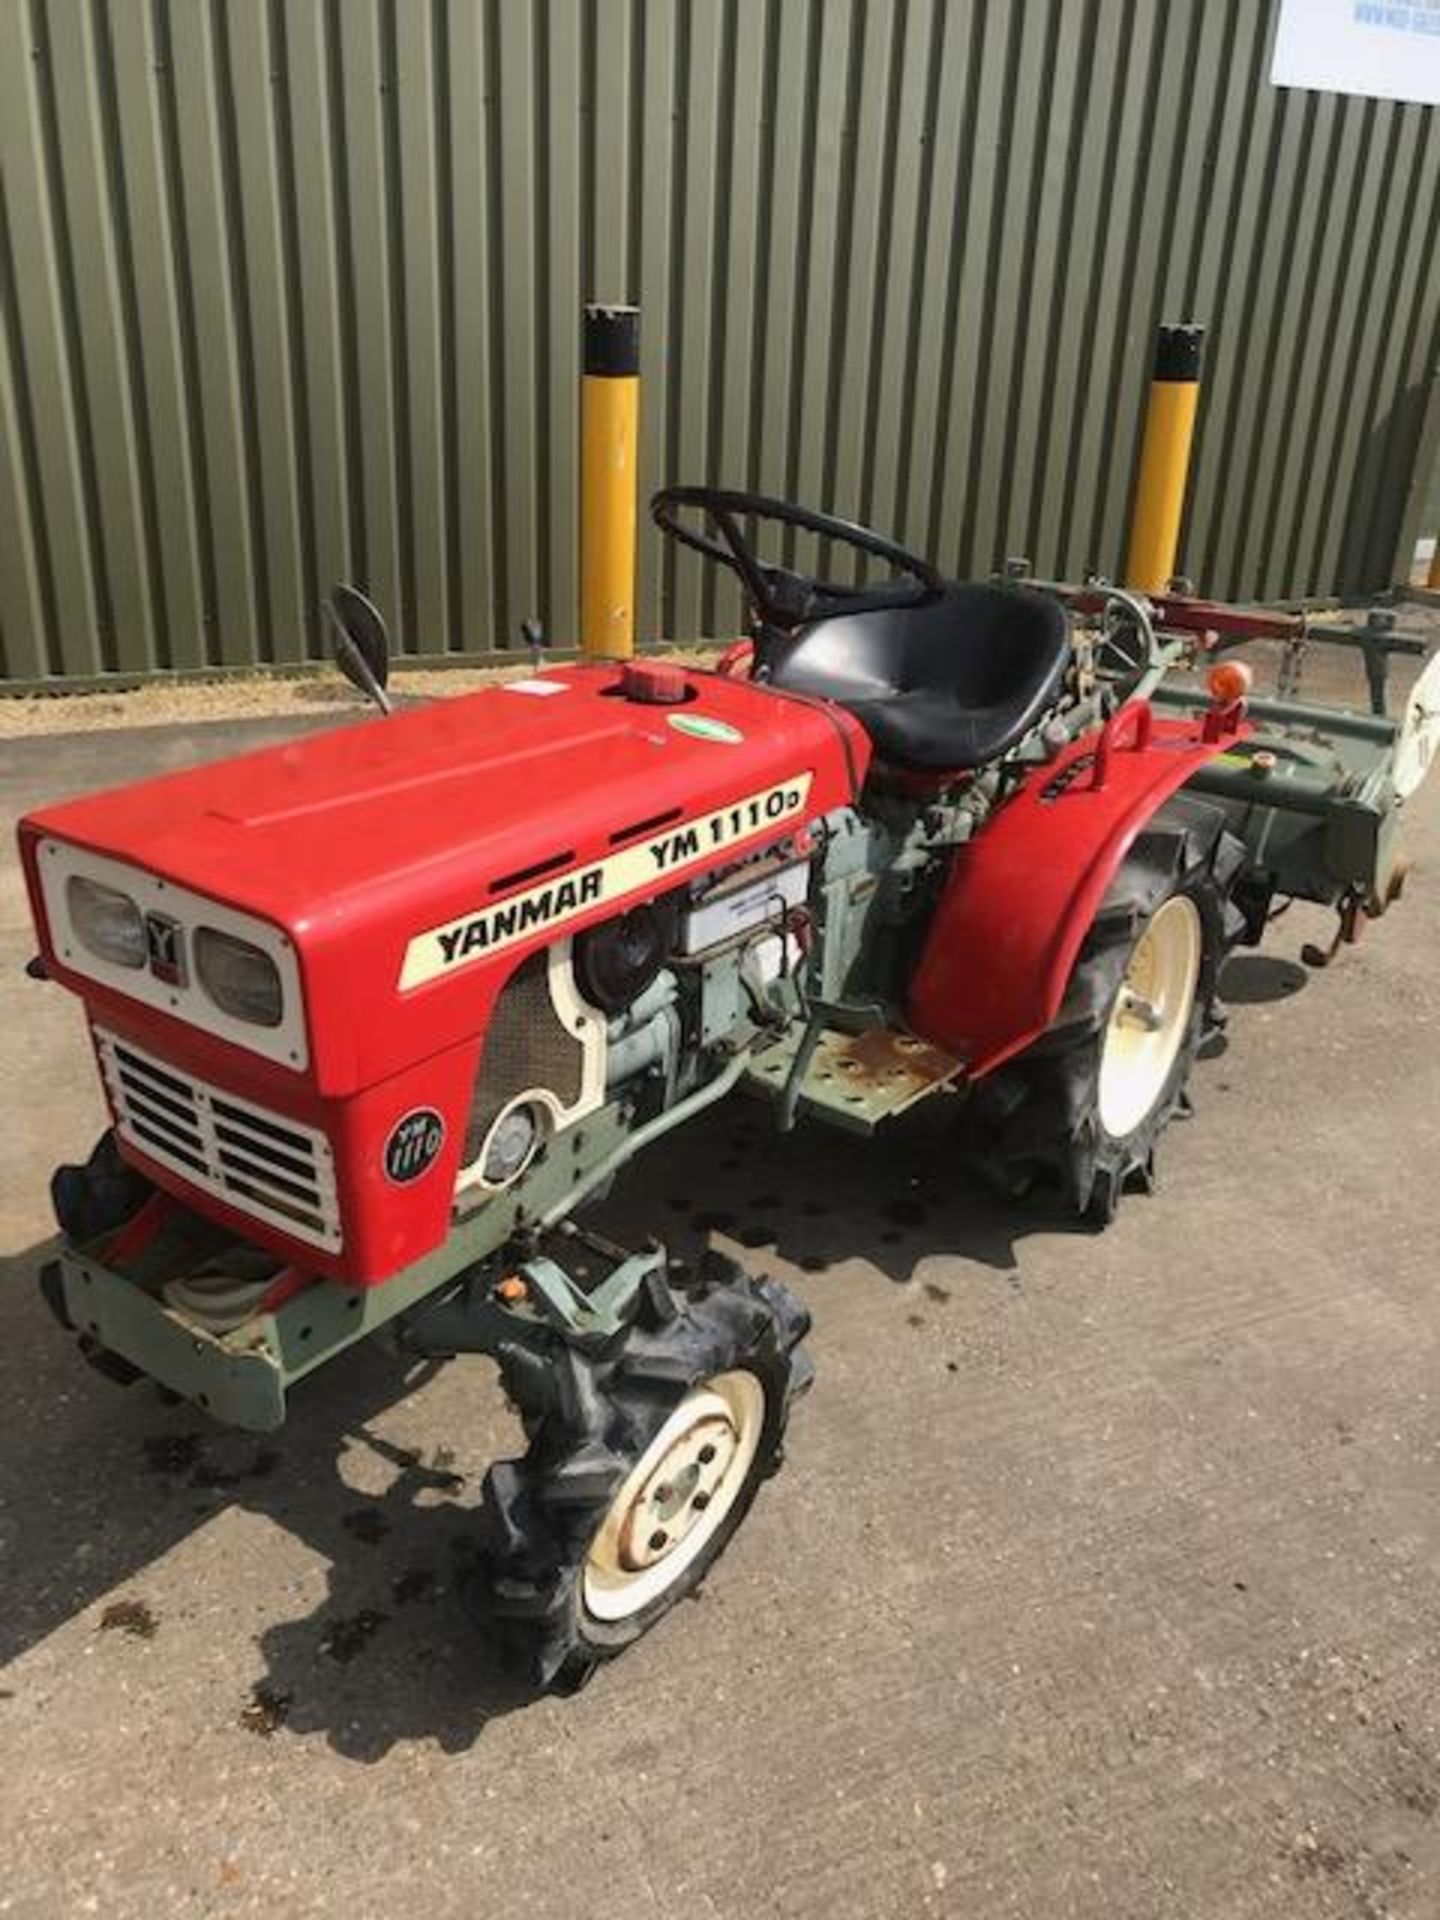 Yanmar YM 1110 D 4 x 4 Diesel Compact Tractor with Rear Rounted Rotavator as shown